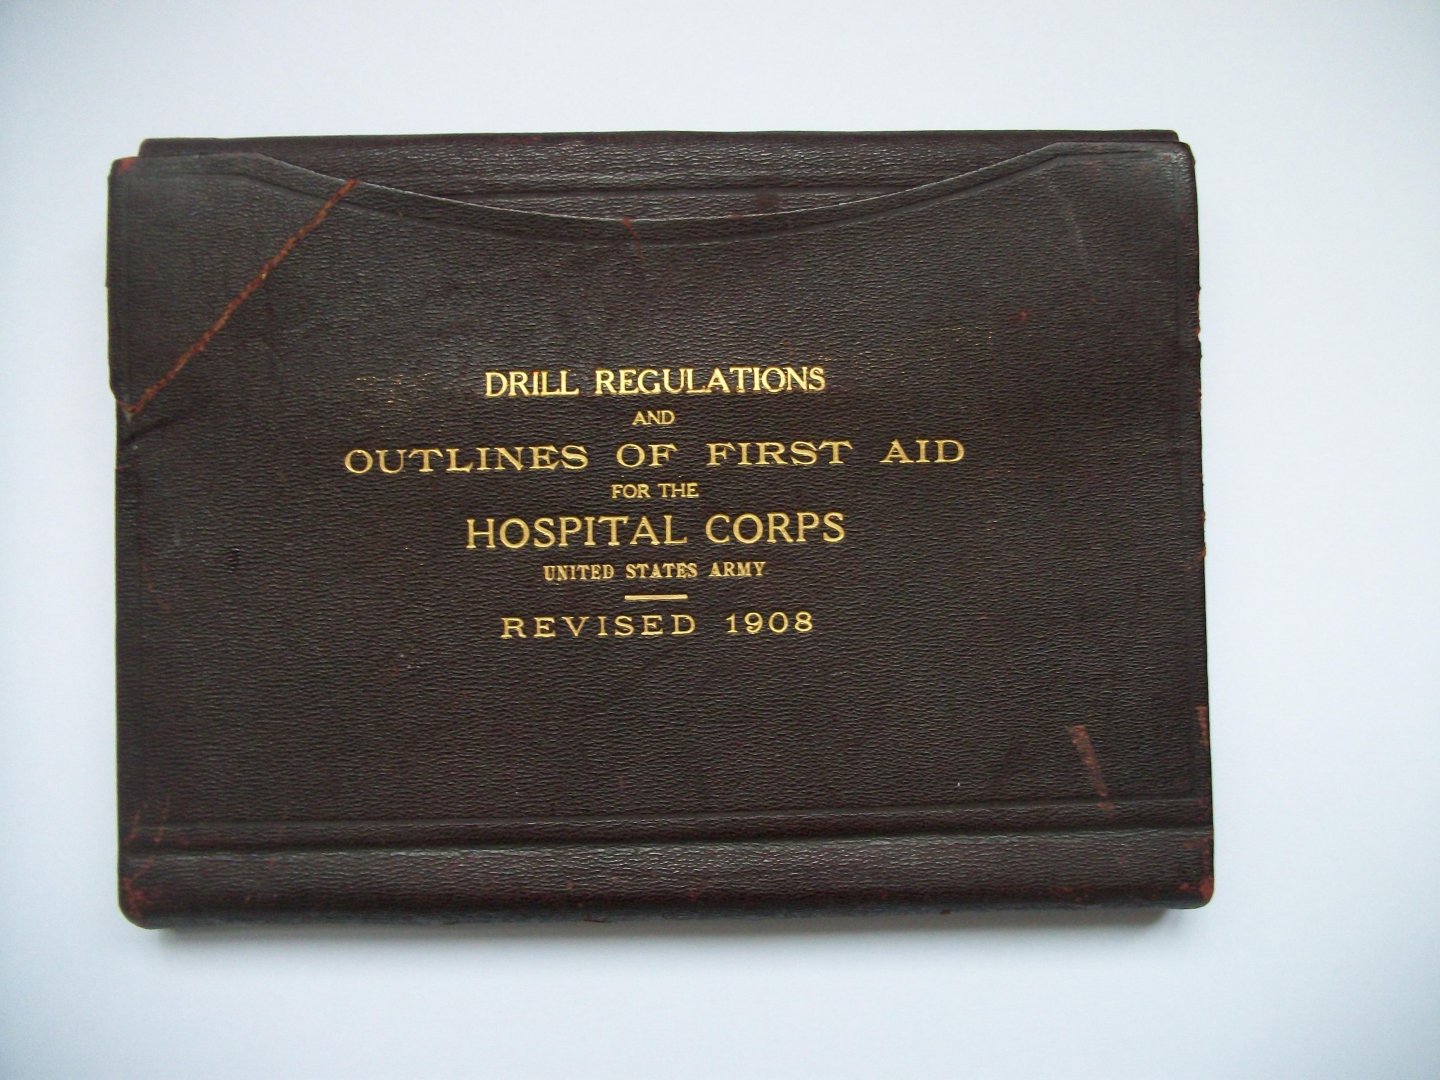  - Drill Regulations and Outlines of First Aid for the Hospital Corps United States Army